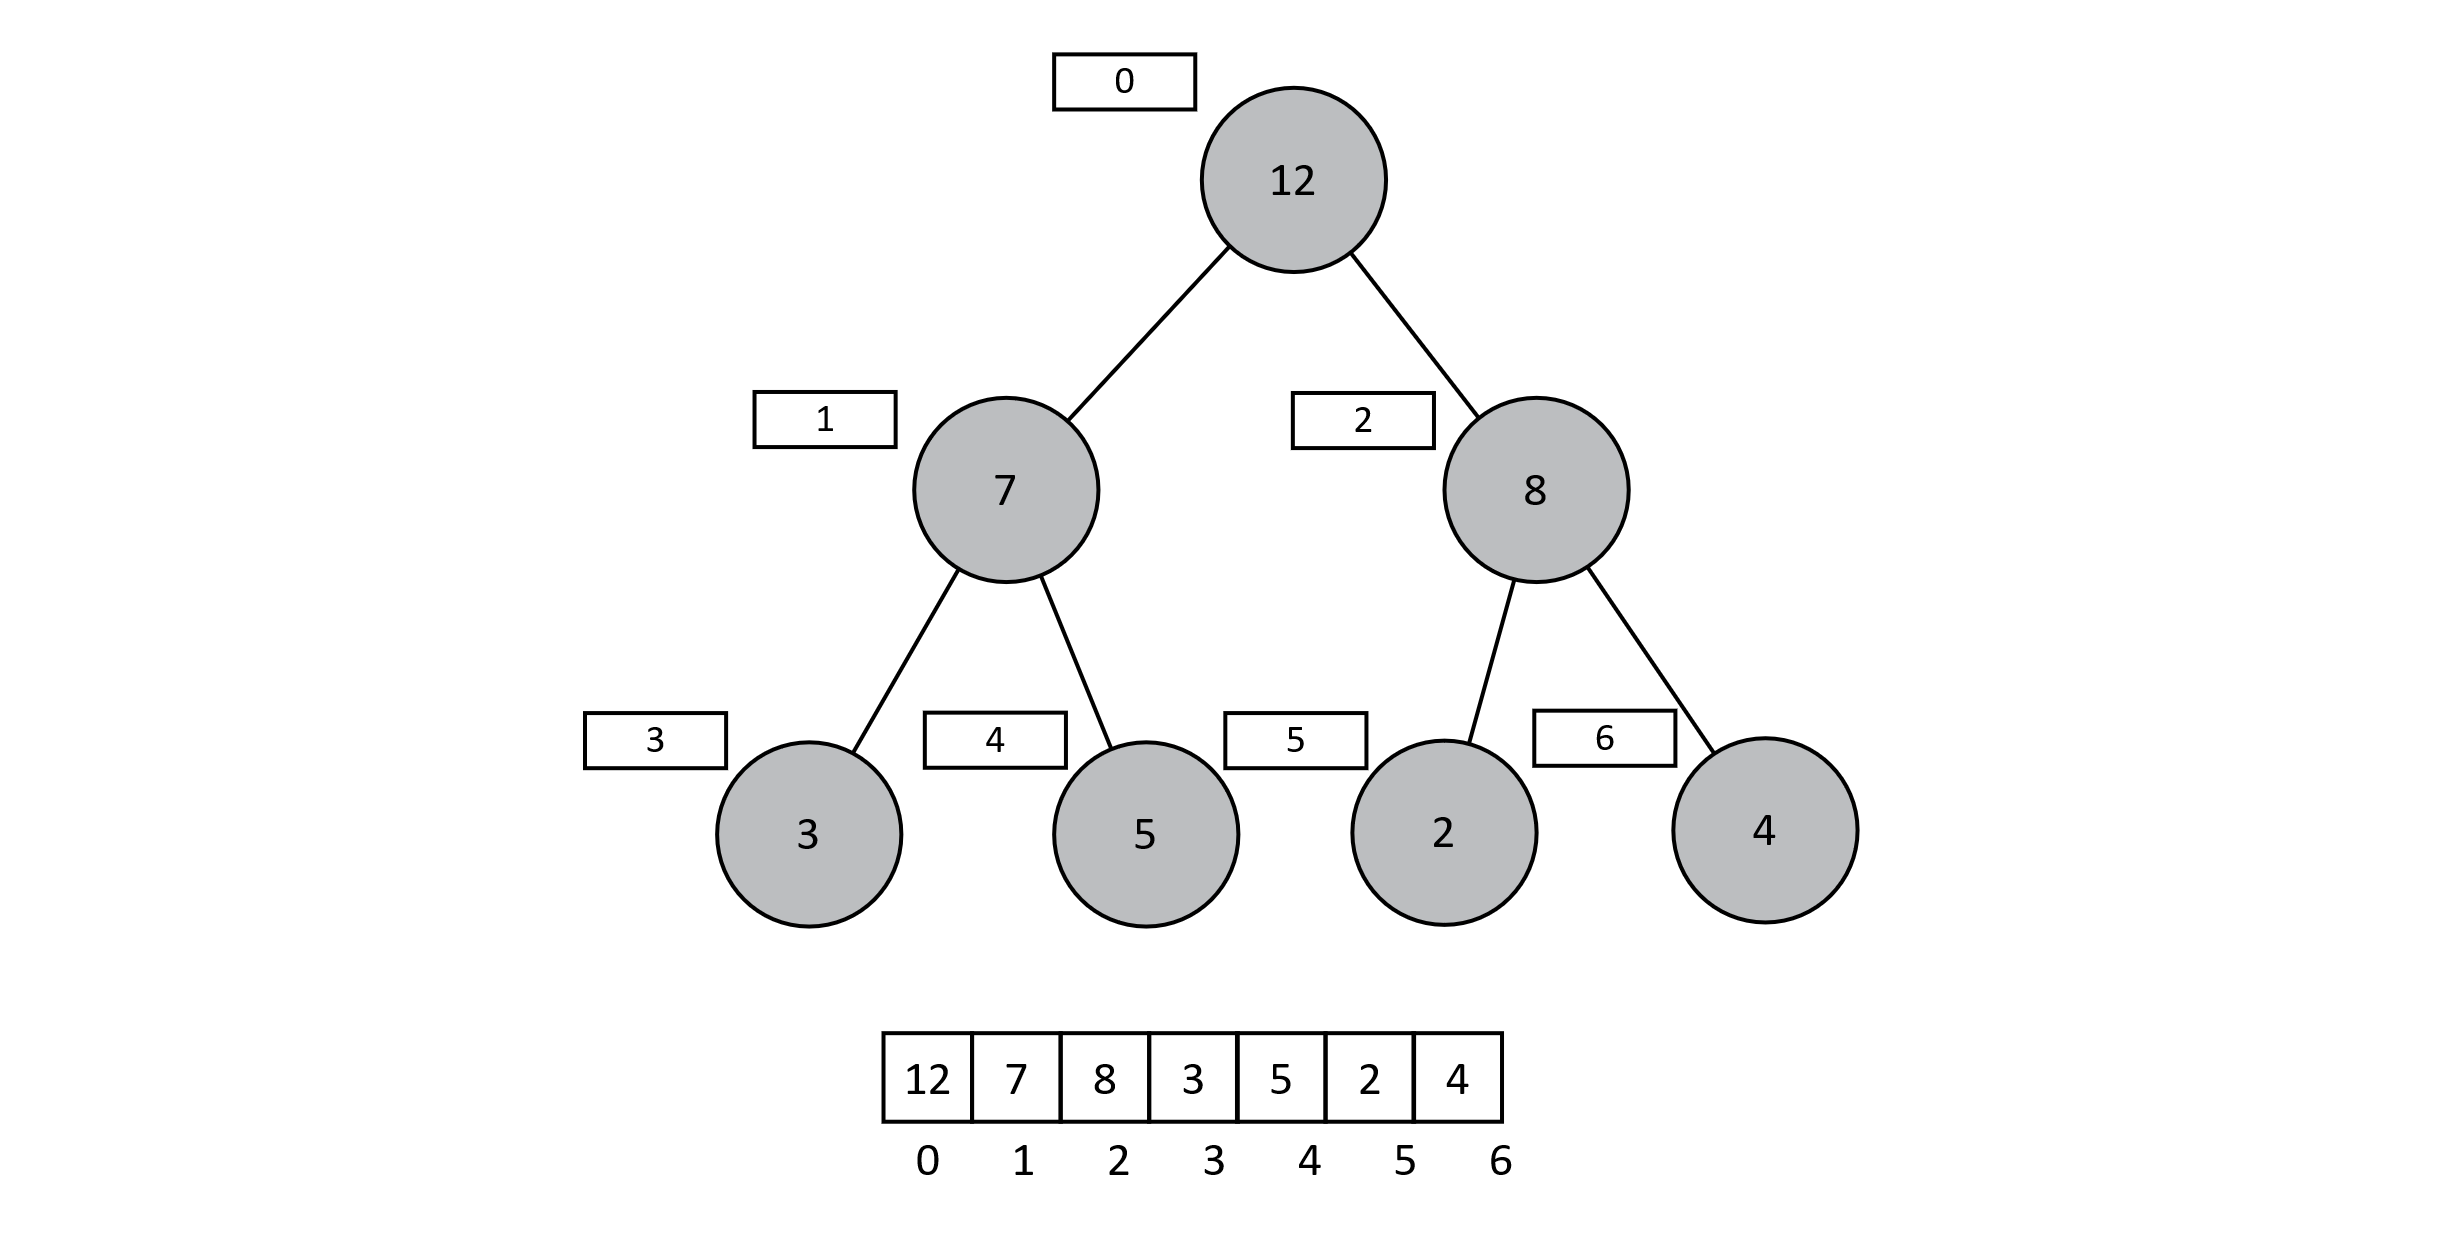 The same heap as the previous figure with 8 now in its correct position according to heap ordering.